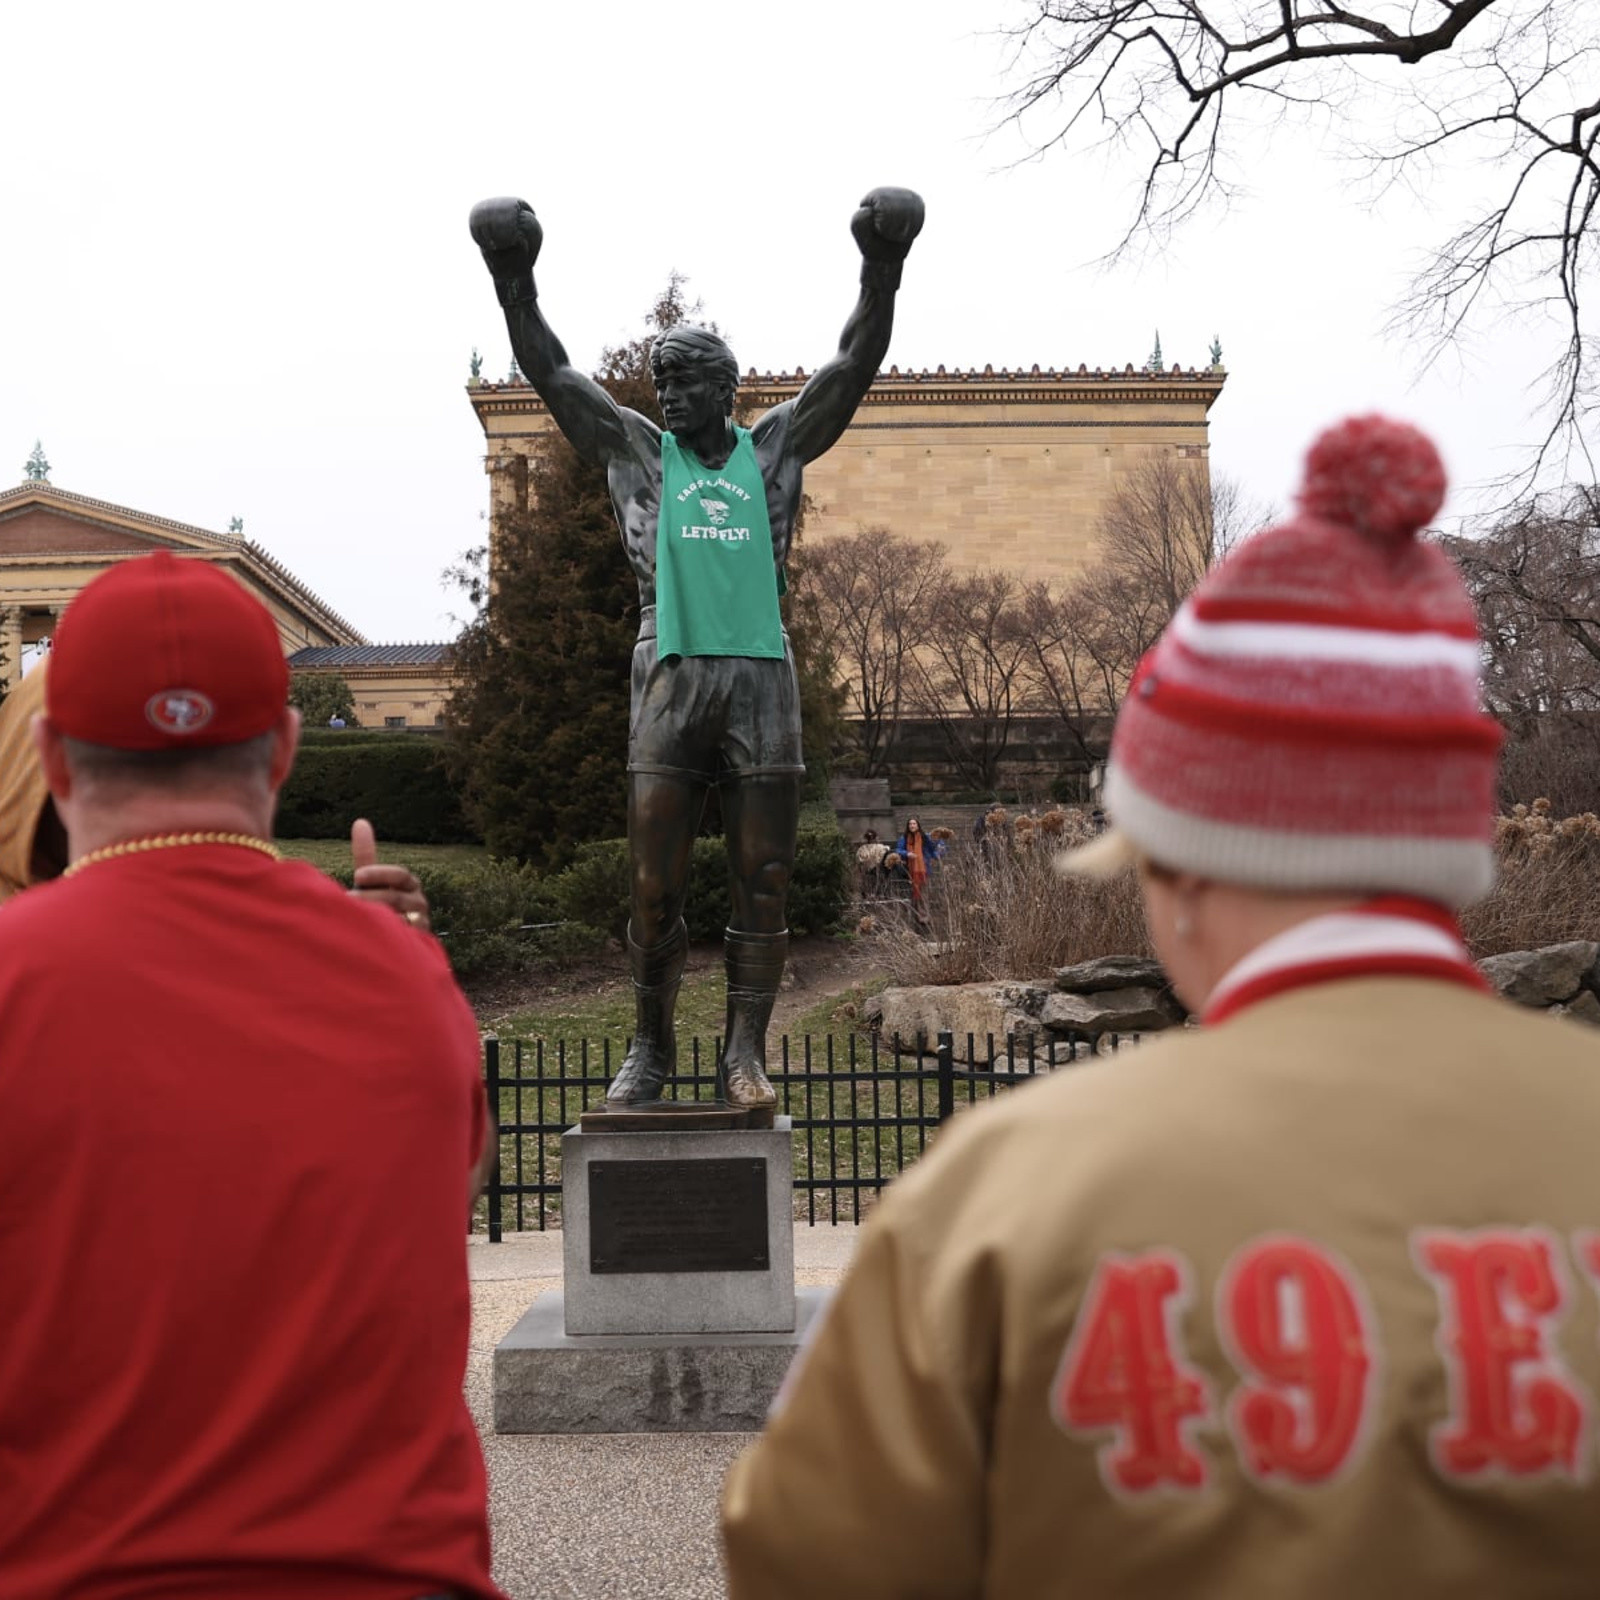 Did the Chiefs already lose Super Bowl LVII because their fans defied Rocky's  statue 'curse' and put on a Kansas City jersey?